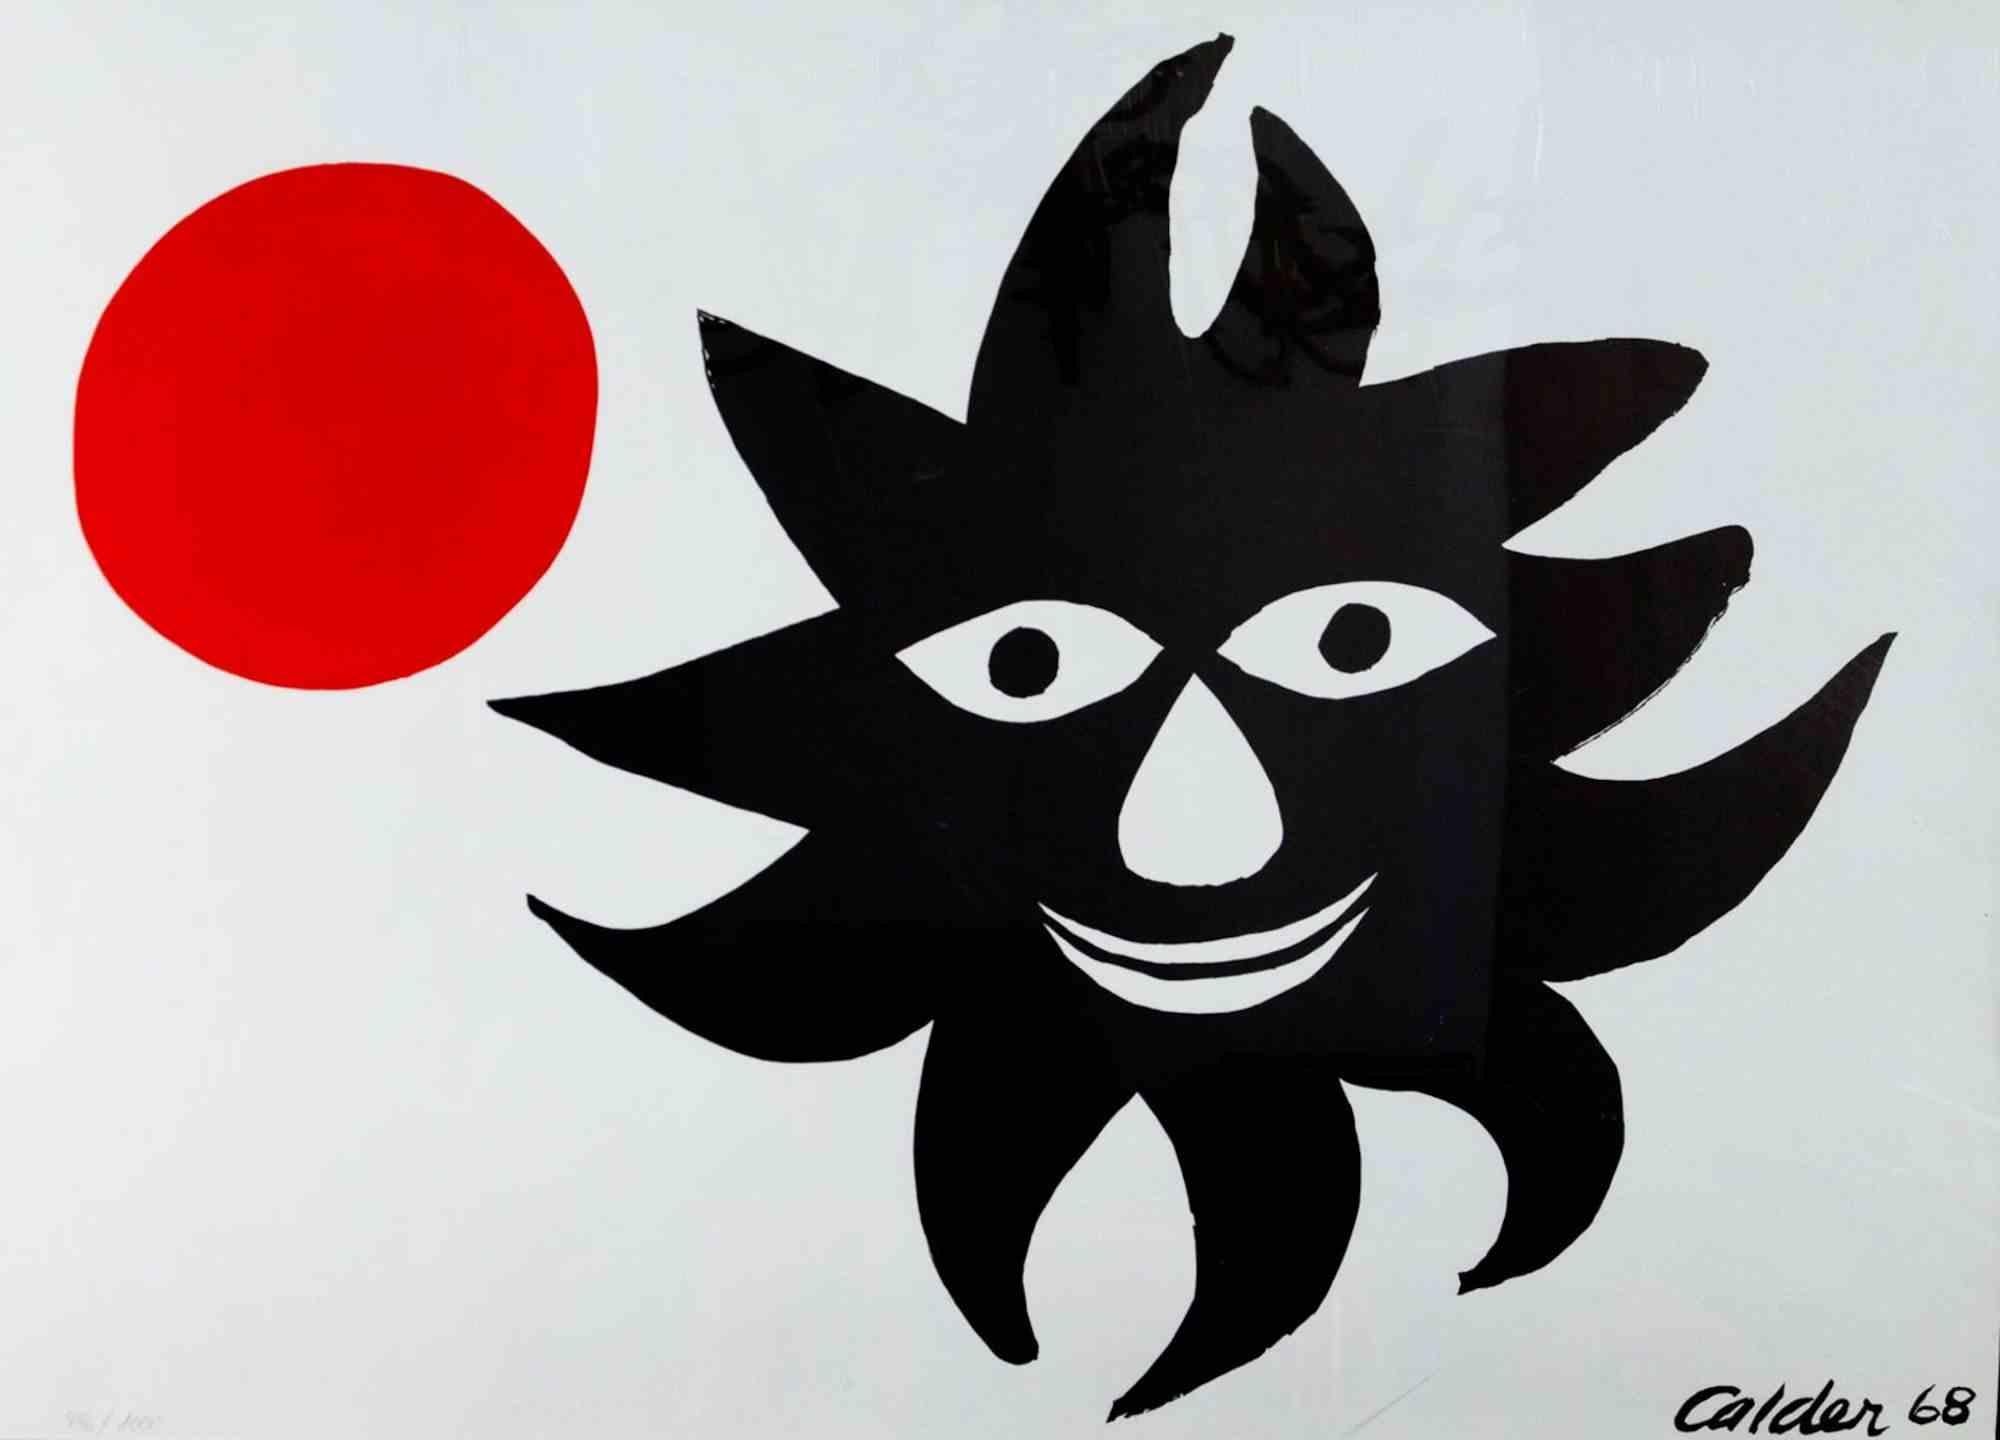 Red Sun is a contemporary artwork realized by Alexander Calder (1898 -1976) in 1968.

Lithograph in colors on 240gsm fine art paper. 

Signed on plate.

Published by the Collector's Guild, New York, 1968 One of the artist's protest images during the